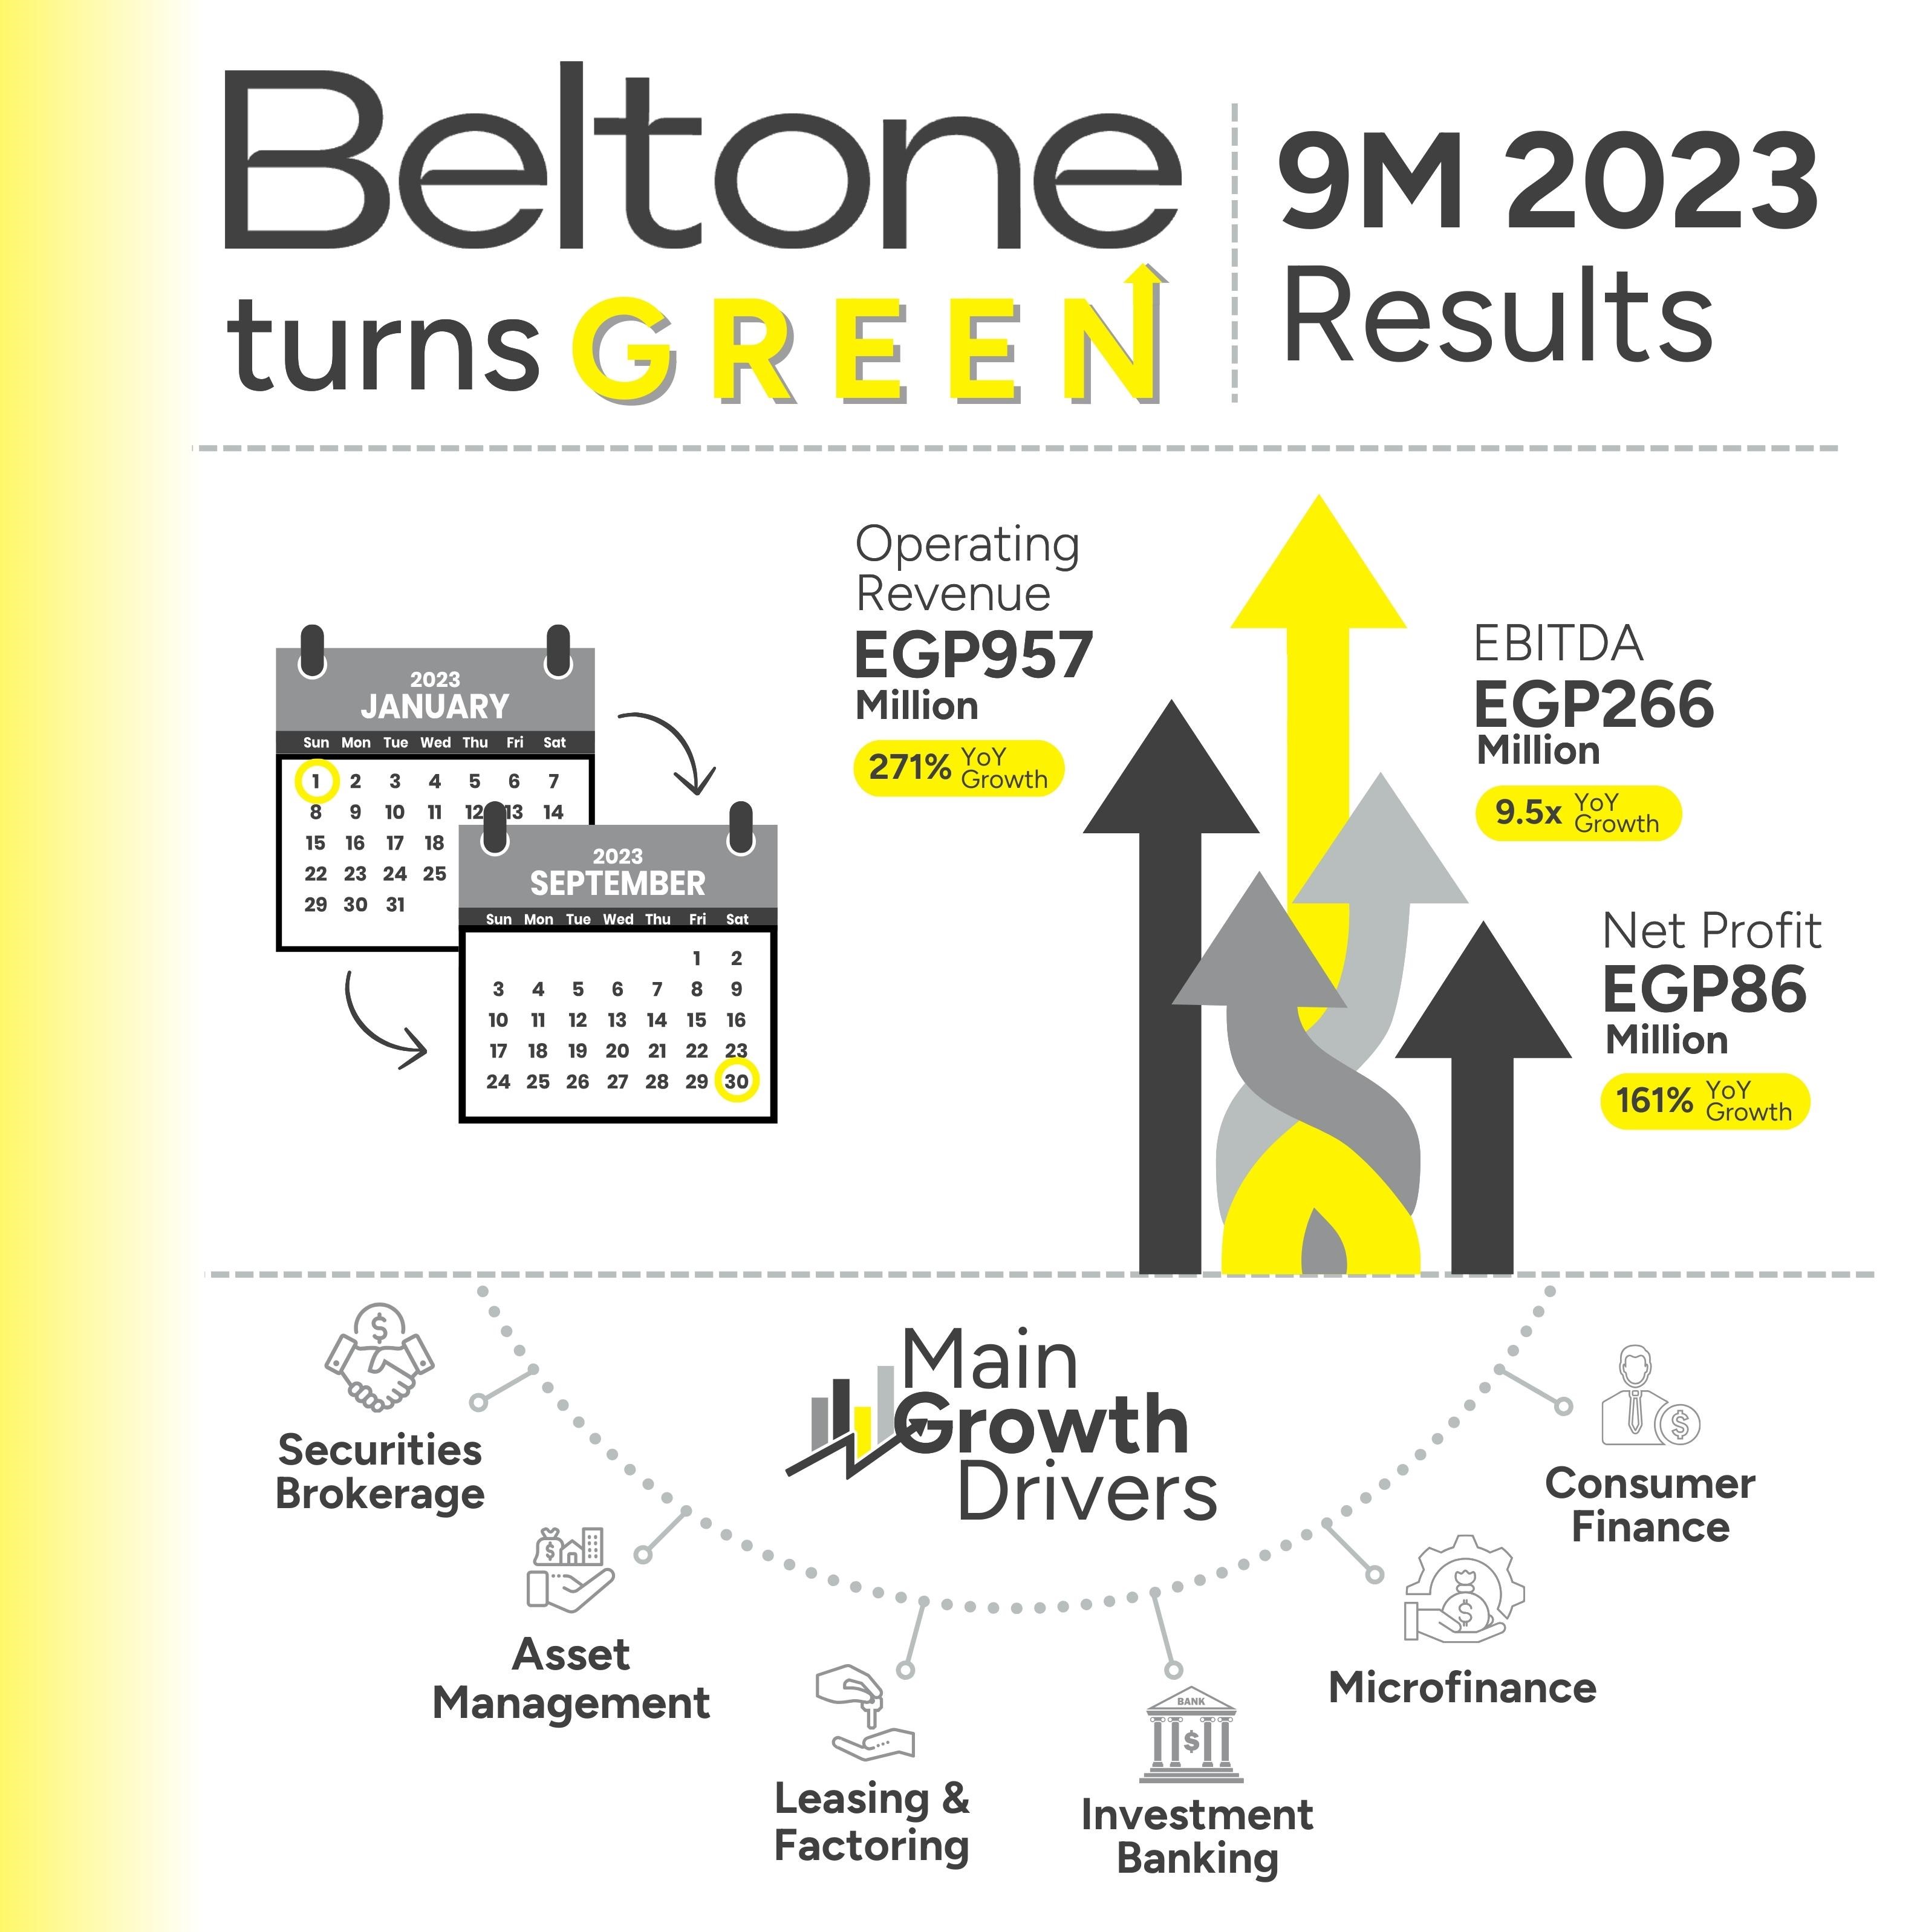 Beltone achieves record Operating Revenue of EGP957 million in 9M2023, a remarkable growth of 271% YoY. Net Profit recorded EGP86 million, an increase of 161% YoY, a strong testimony to a major transformation after 3 years of consecutive losses